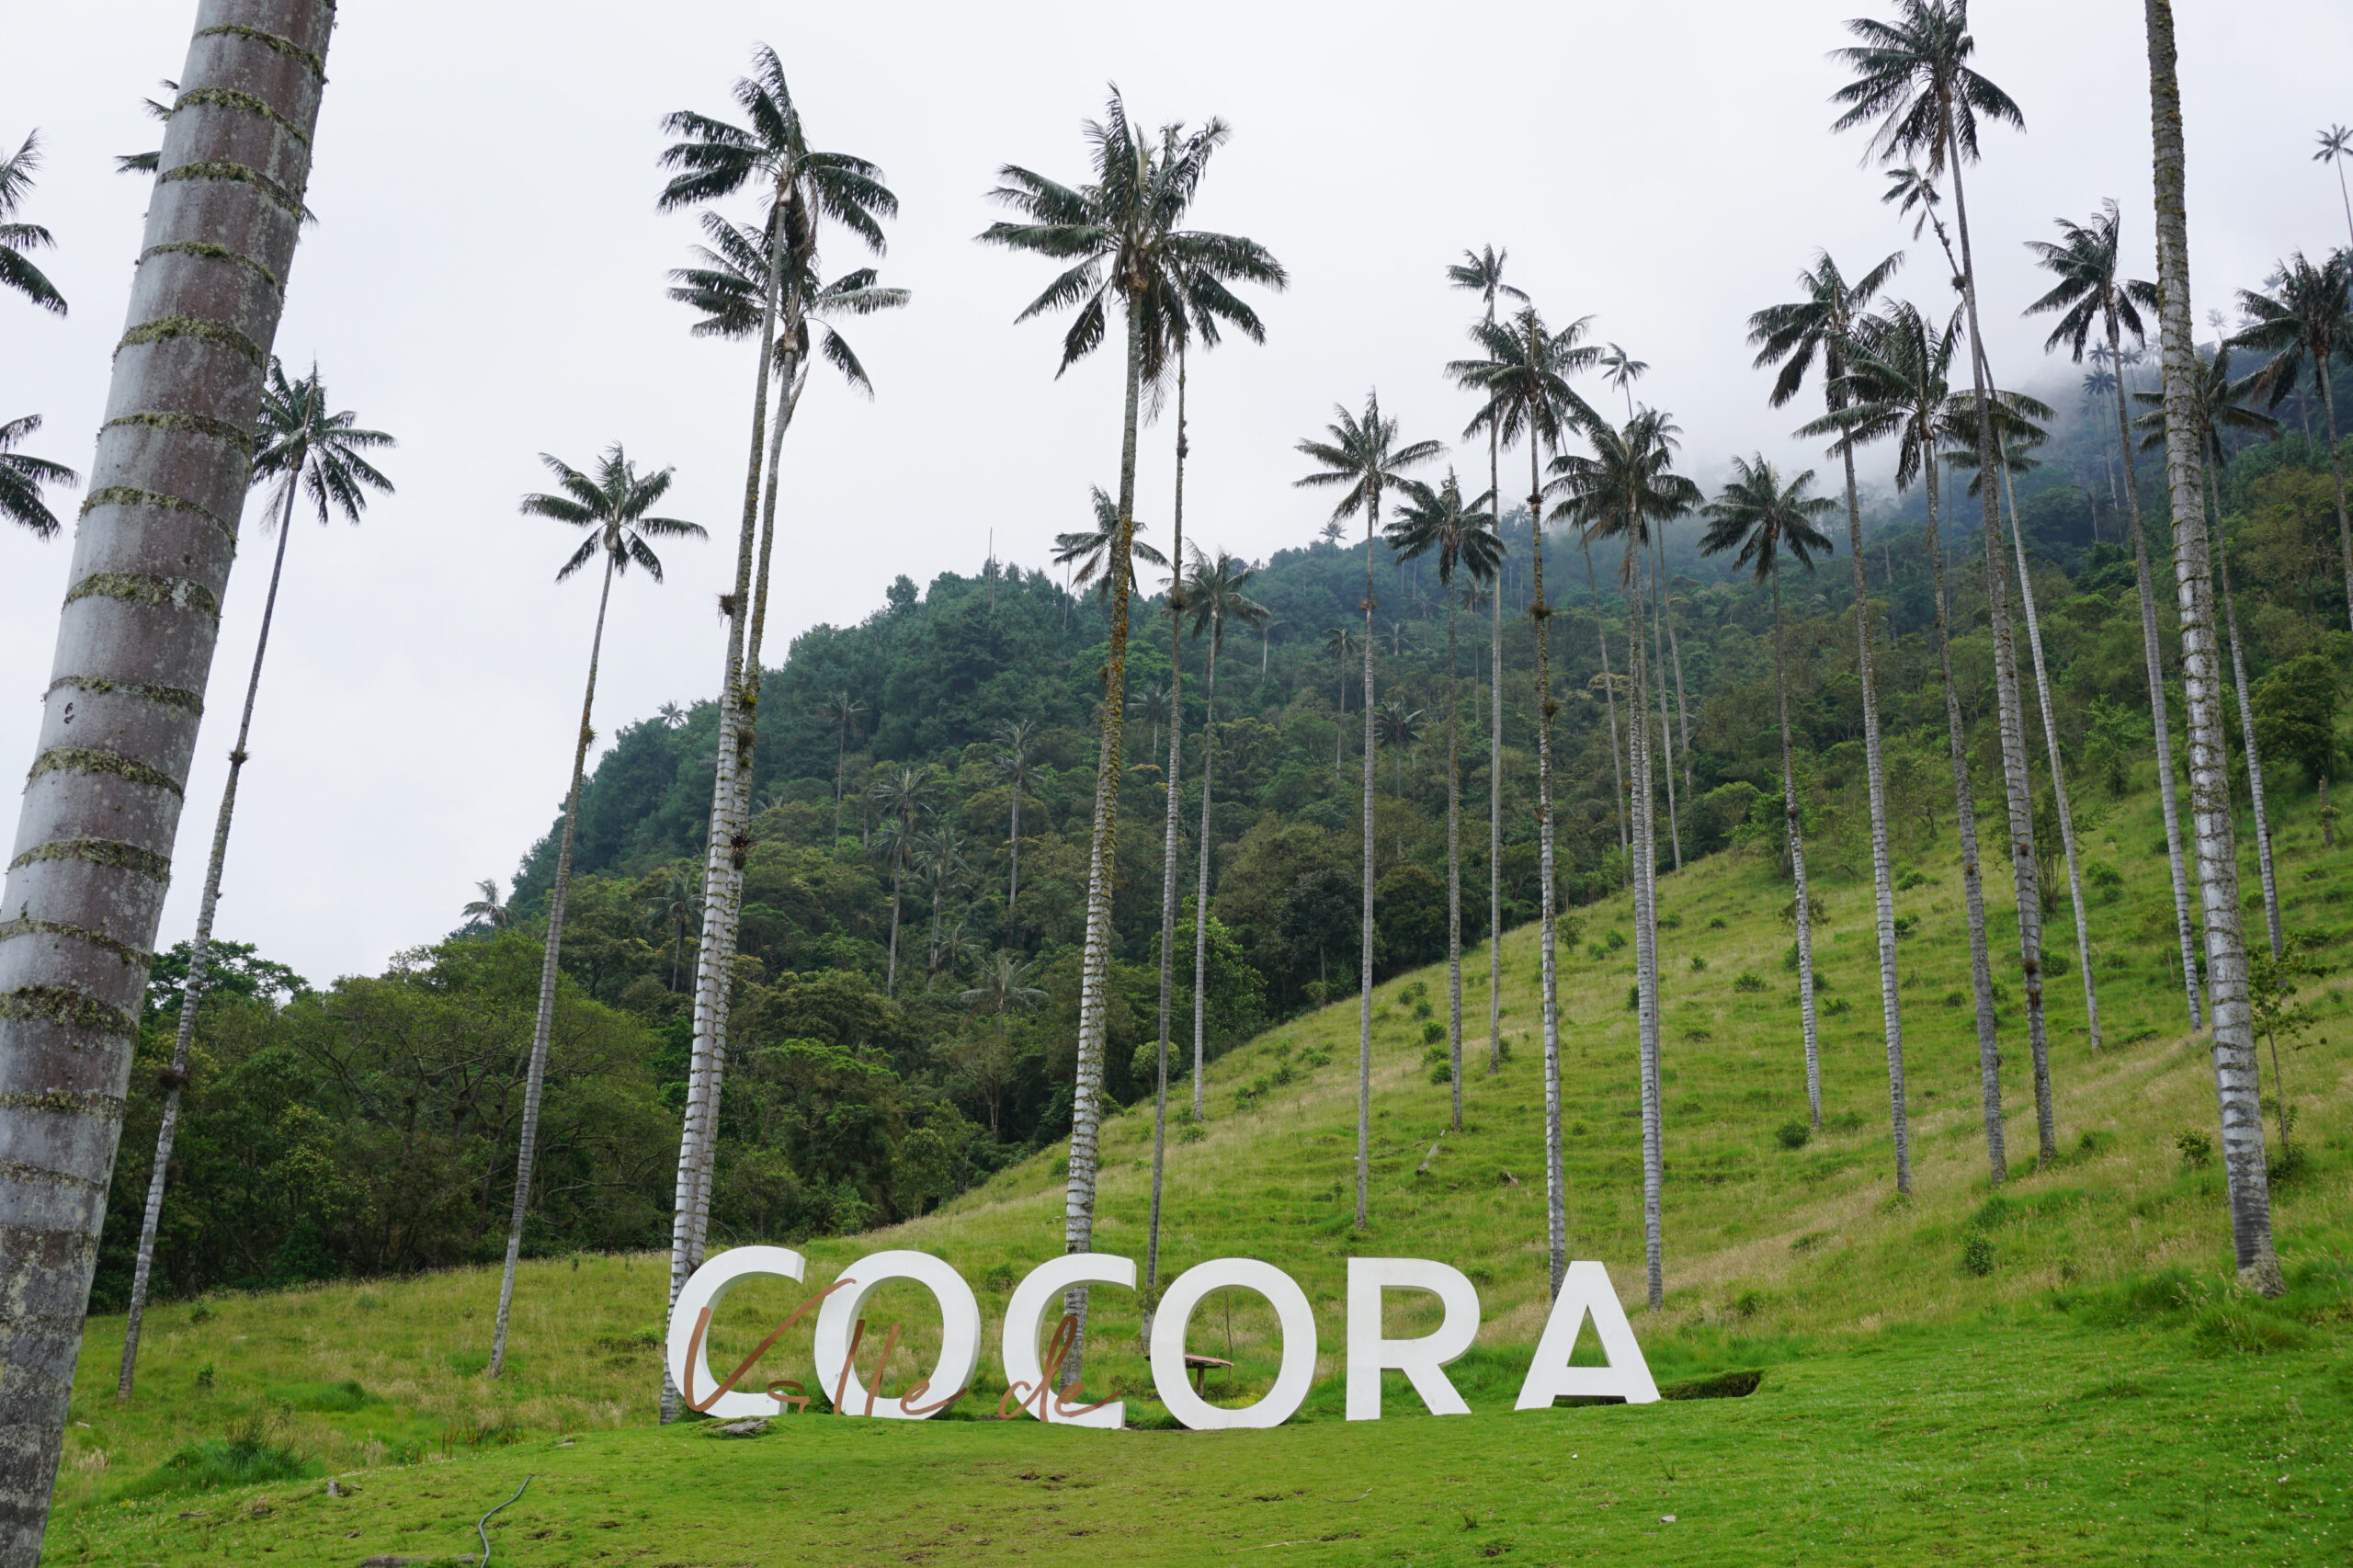 Hollywood-style "Cocora" sign among the Palm Trees